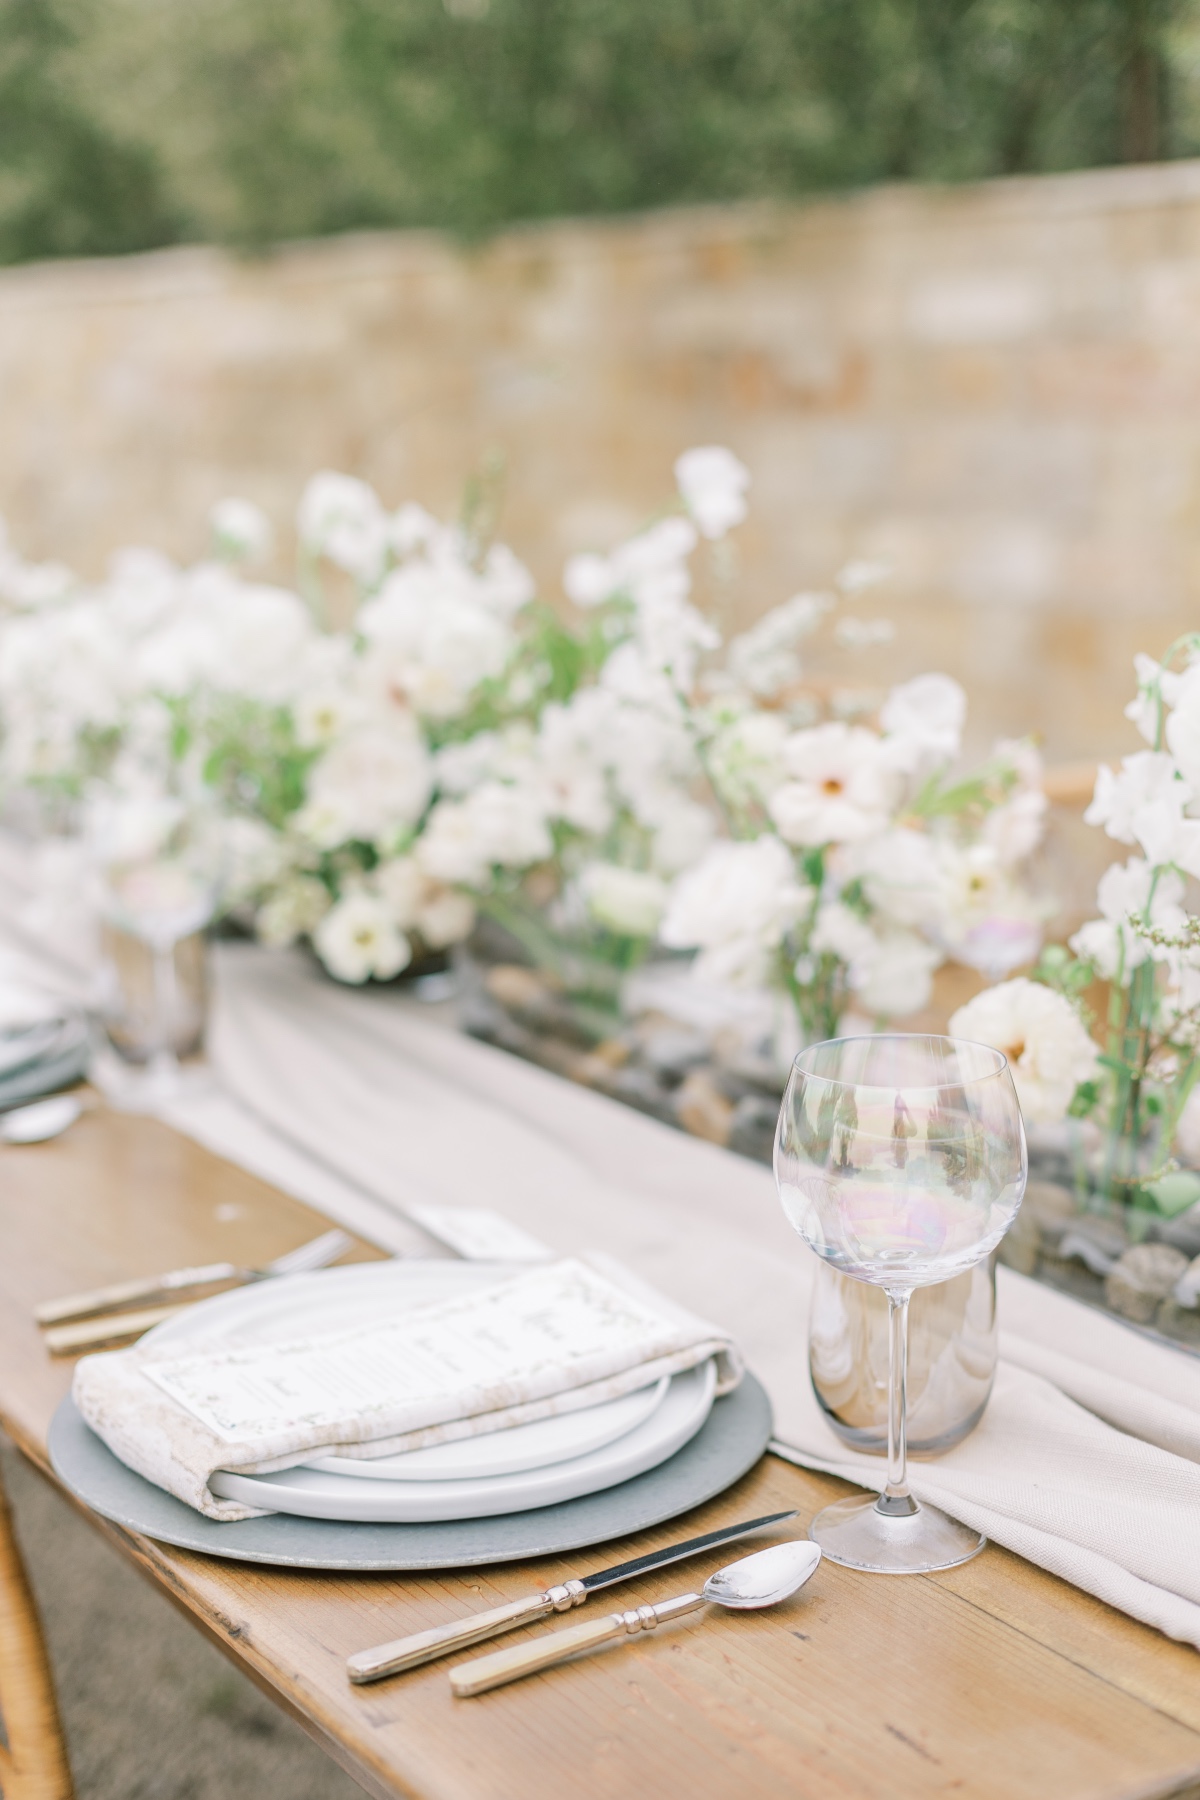 How To Make Your Wedding Stand Out At A Popular Venue